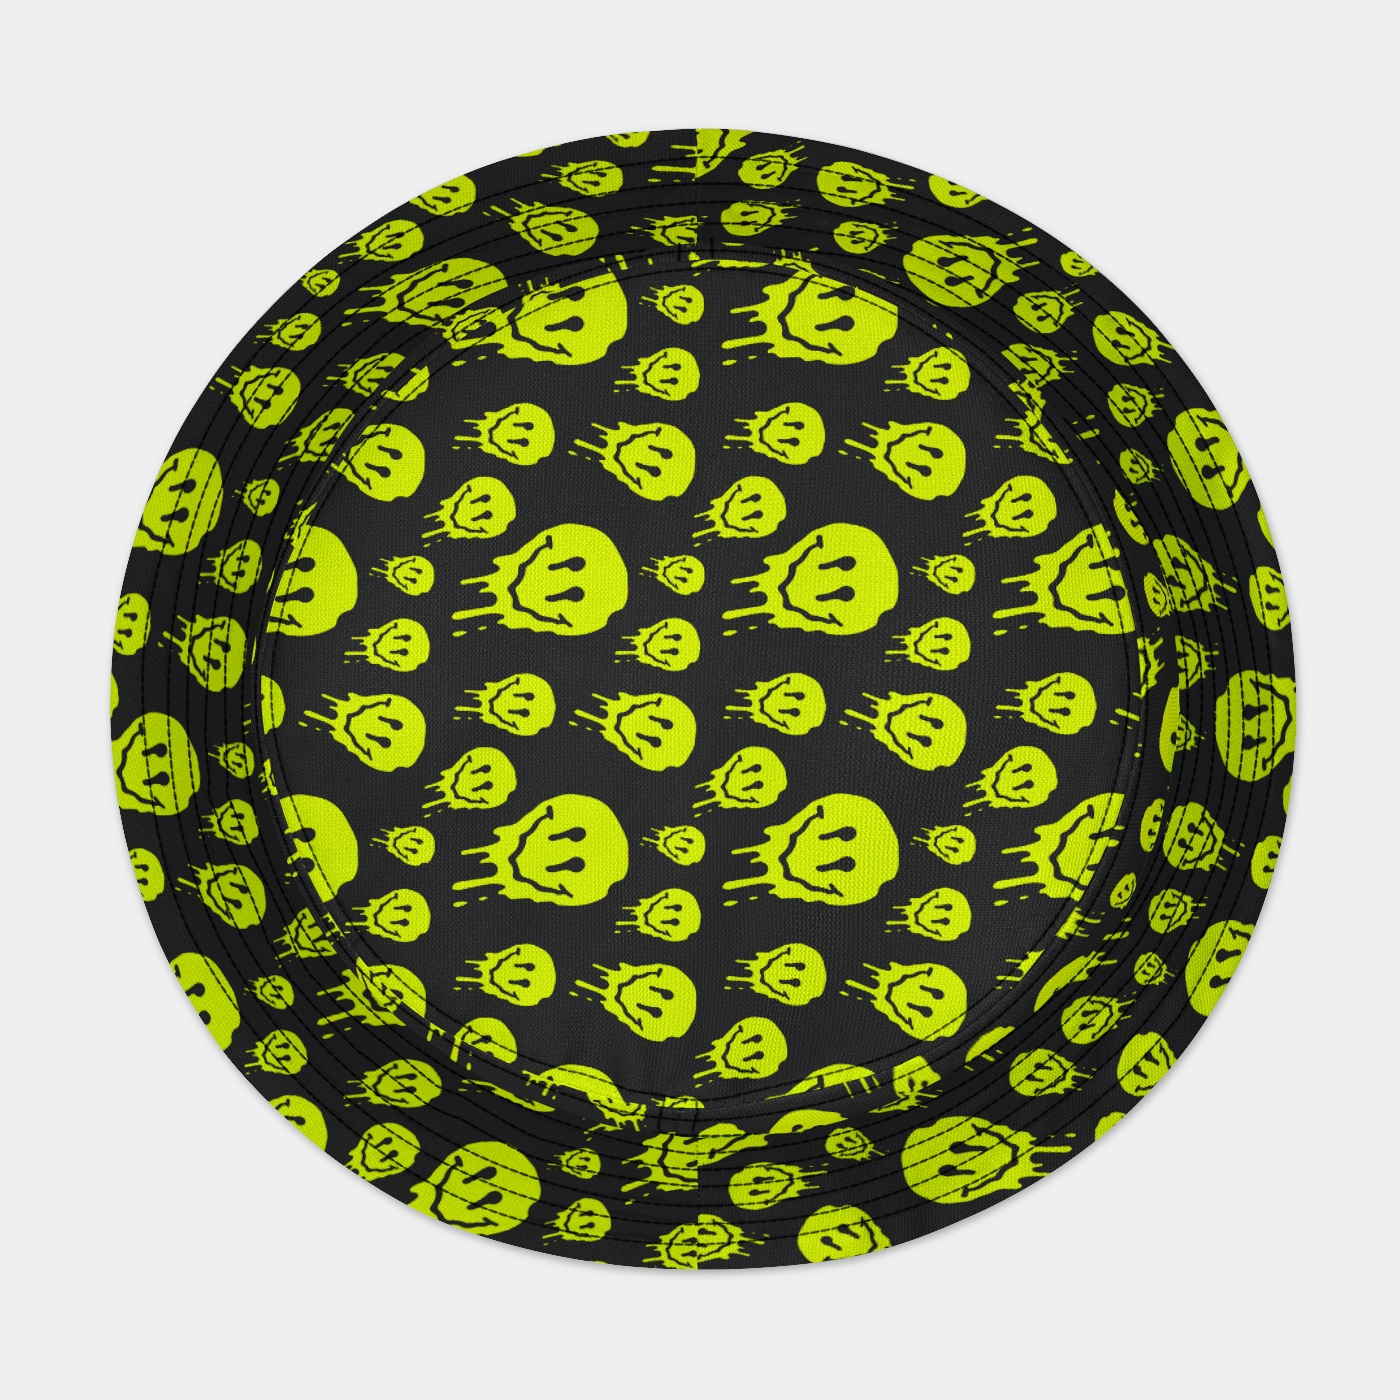 Drippy Melting Smiley Faces Bucket Hat